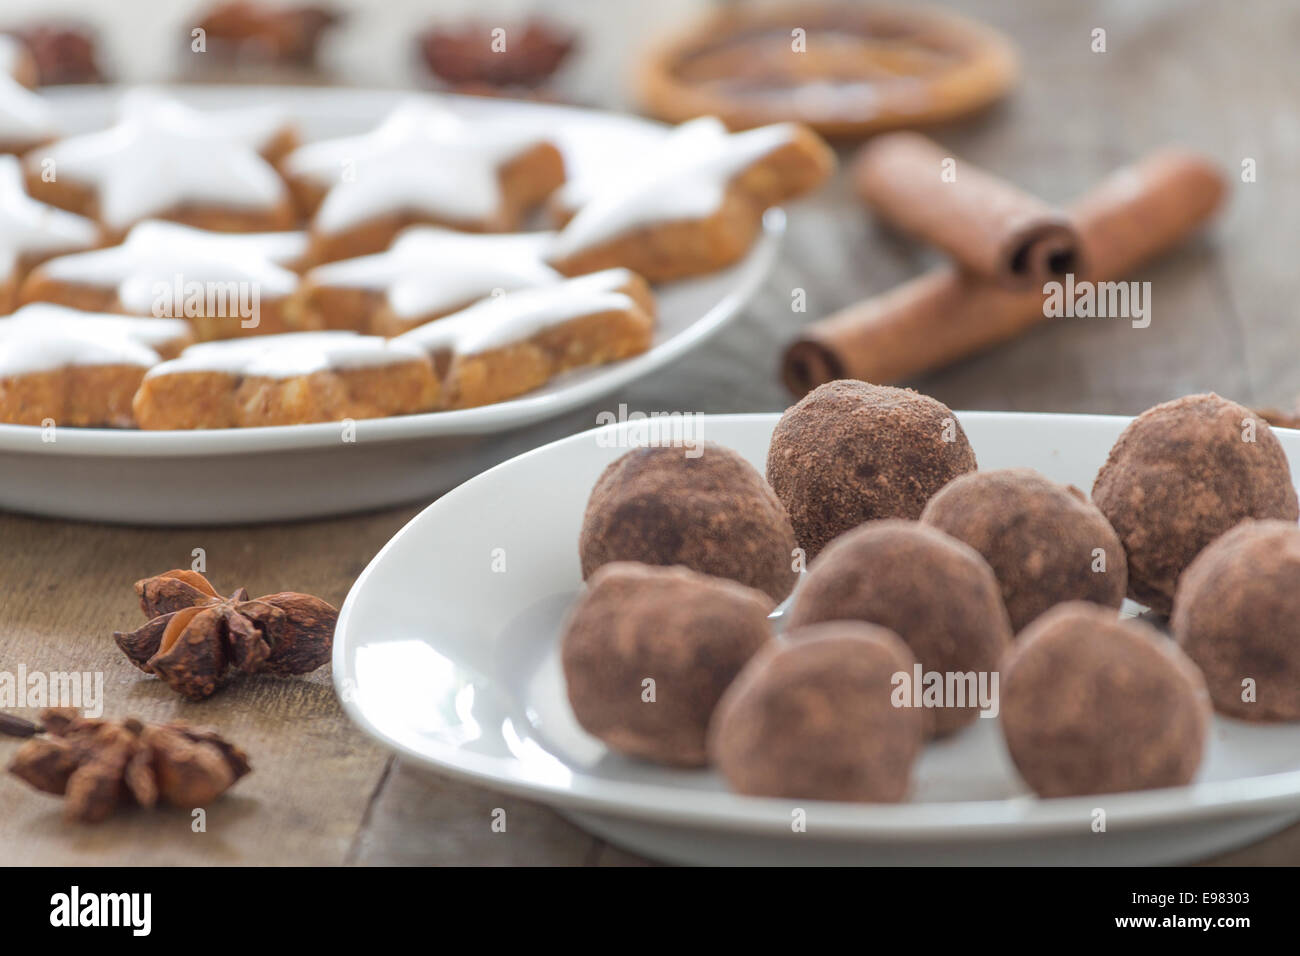 star-shaped cinnamon biscuits and marzipan potatoes with cinnamon sticks star anise and slices of dried oranges as decoration fo Stock Photo